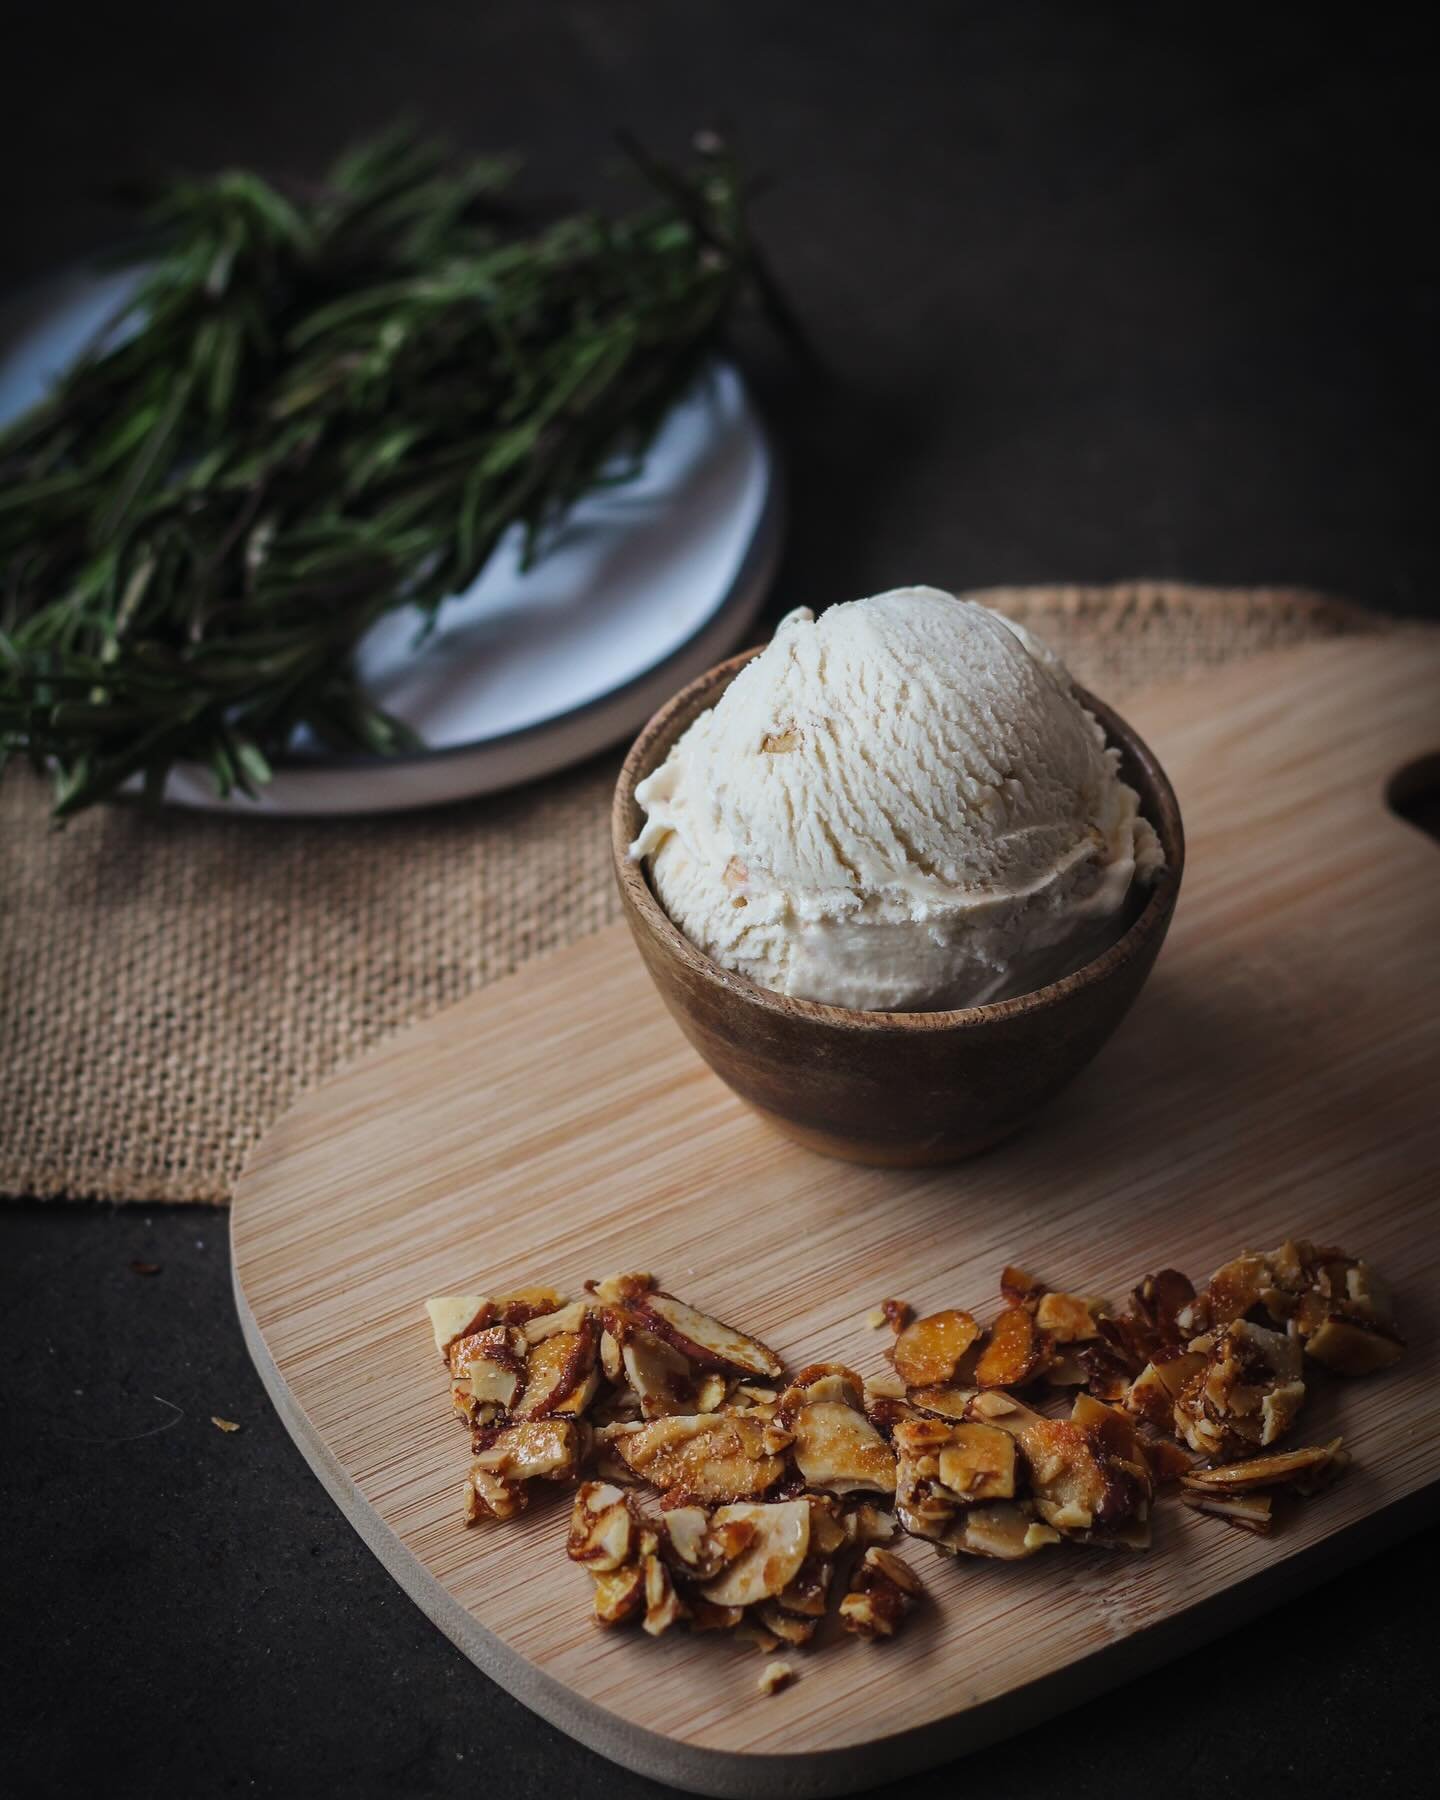 MAY FLING: BROWN BUTTER ROSEMARY CRUNCH 🙌🫶🏼

Satisfy your sweet and savory cravings with our brown butter rosemary scoop! Try our delectable brown butter ice cream infuse with rosemary with crunchy almond praline inclusion. 😋🤤

Available at all 